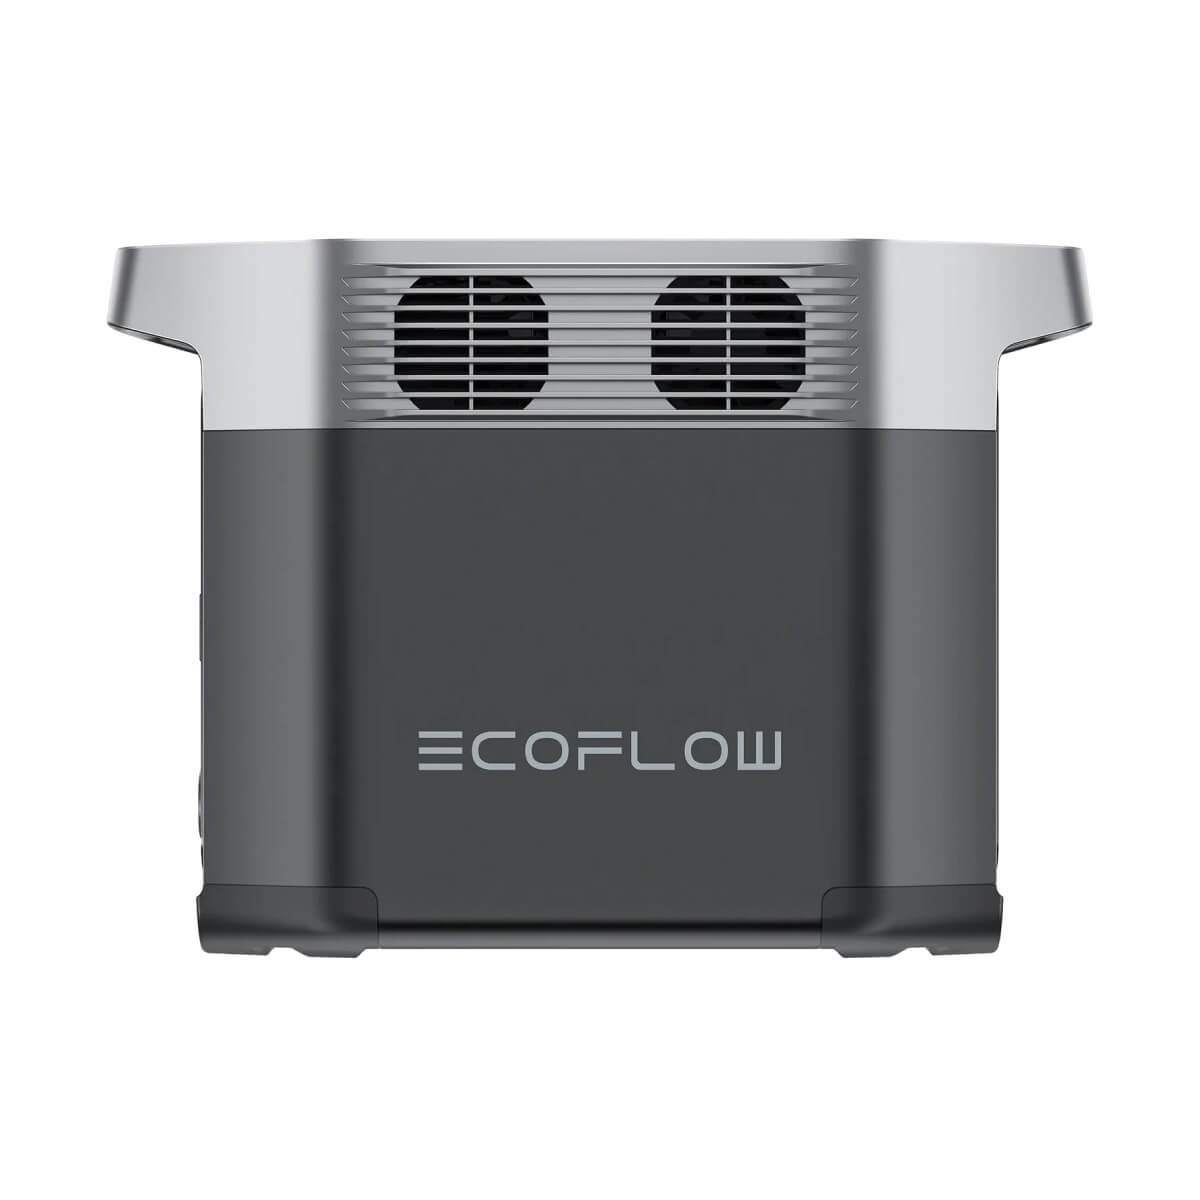 EcoFlow portable power station with dual ventilator fans on the top section and the EcoFlow branding on the front panel.